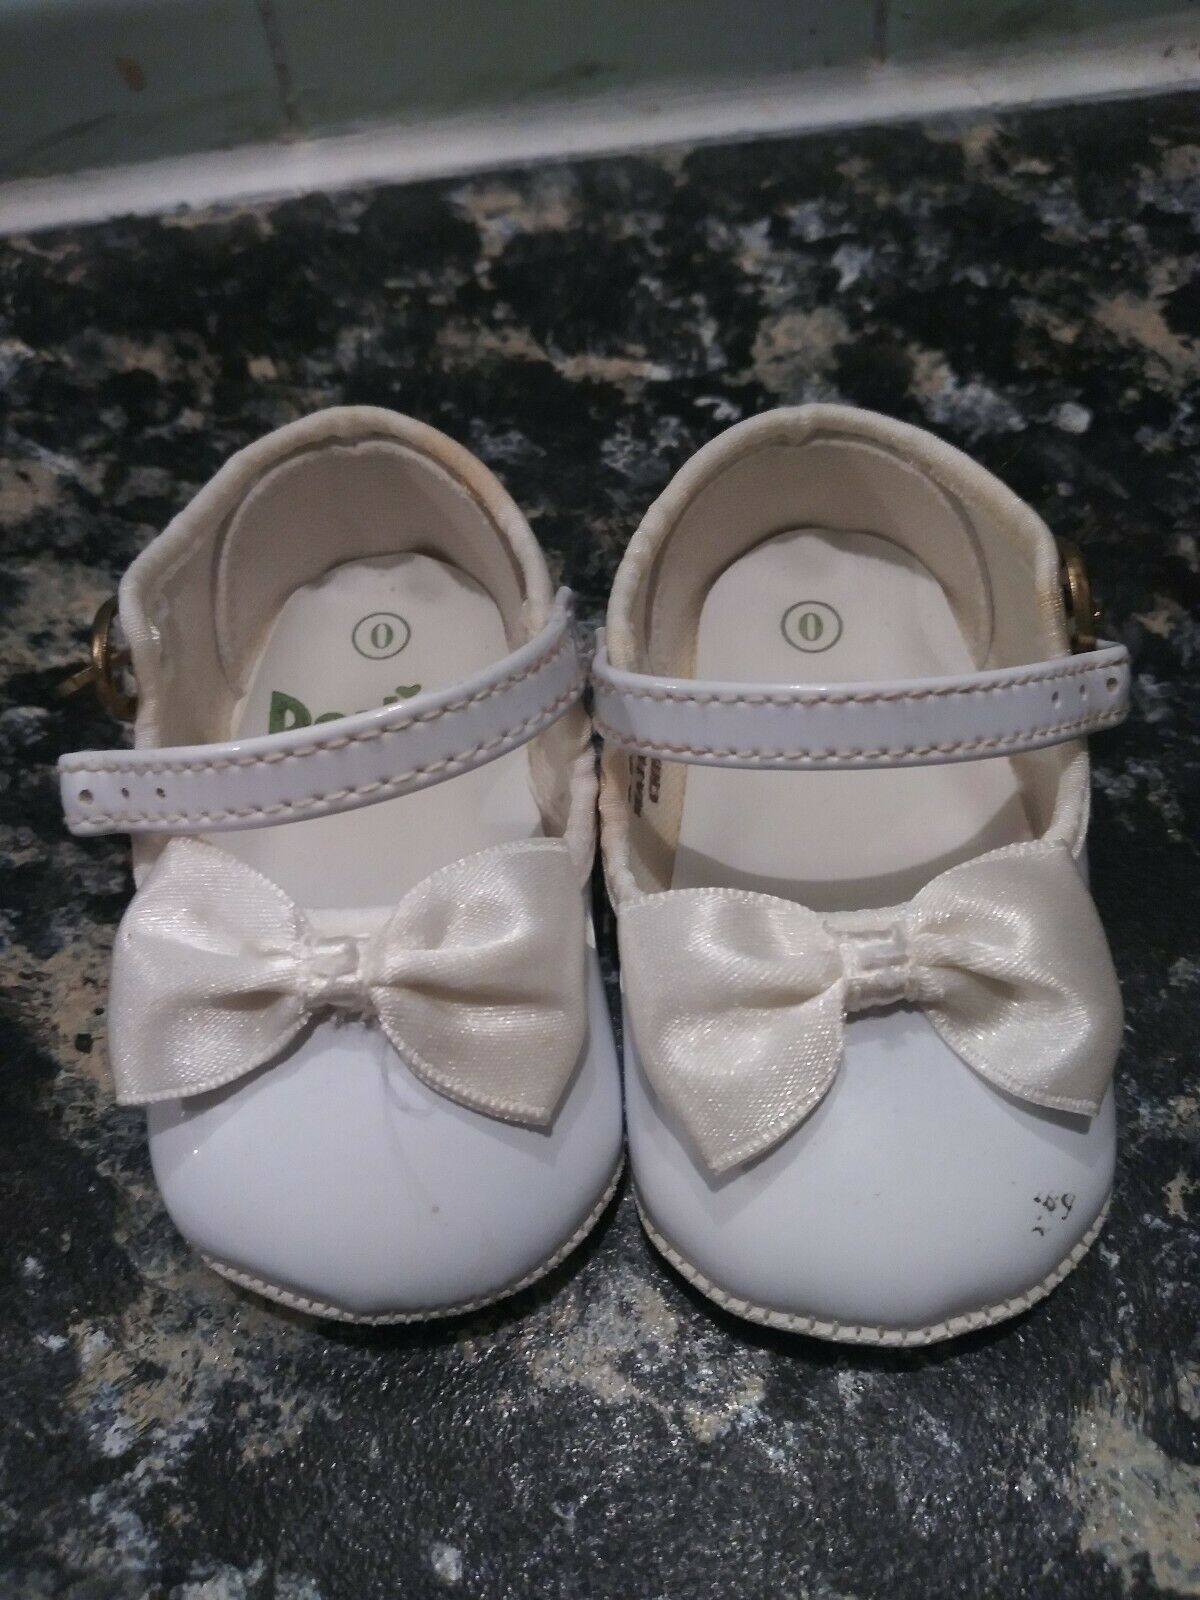 Vintage Darling Doll Or Infant Baby Doll Shoes White Bows Adjustable Straps Sz 0